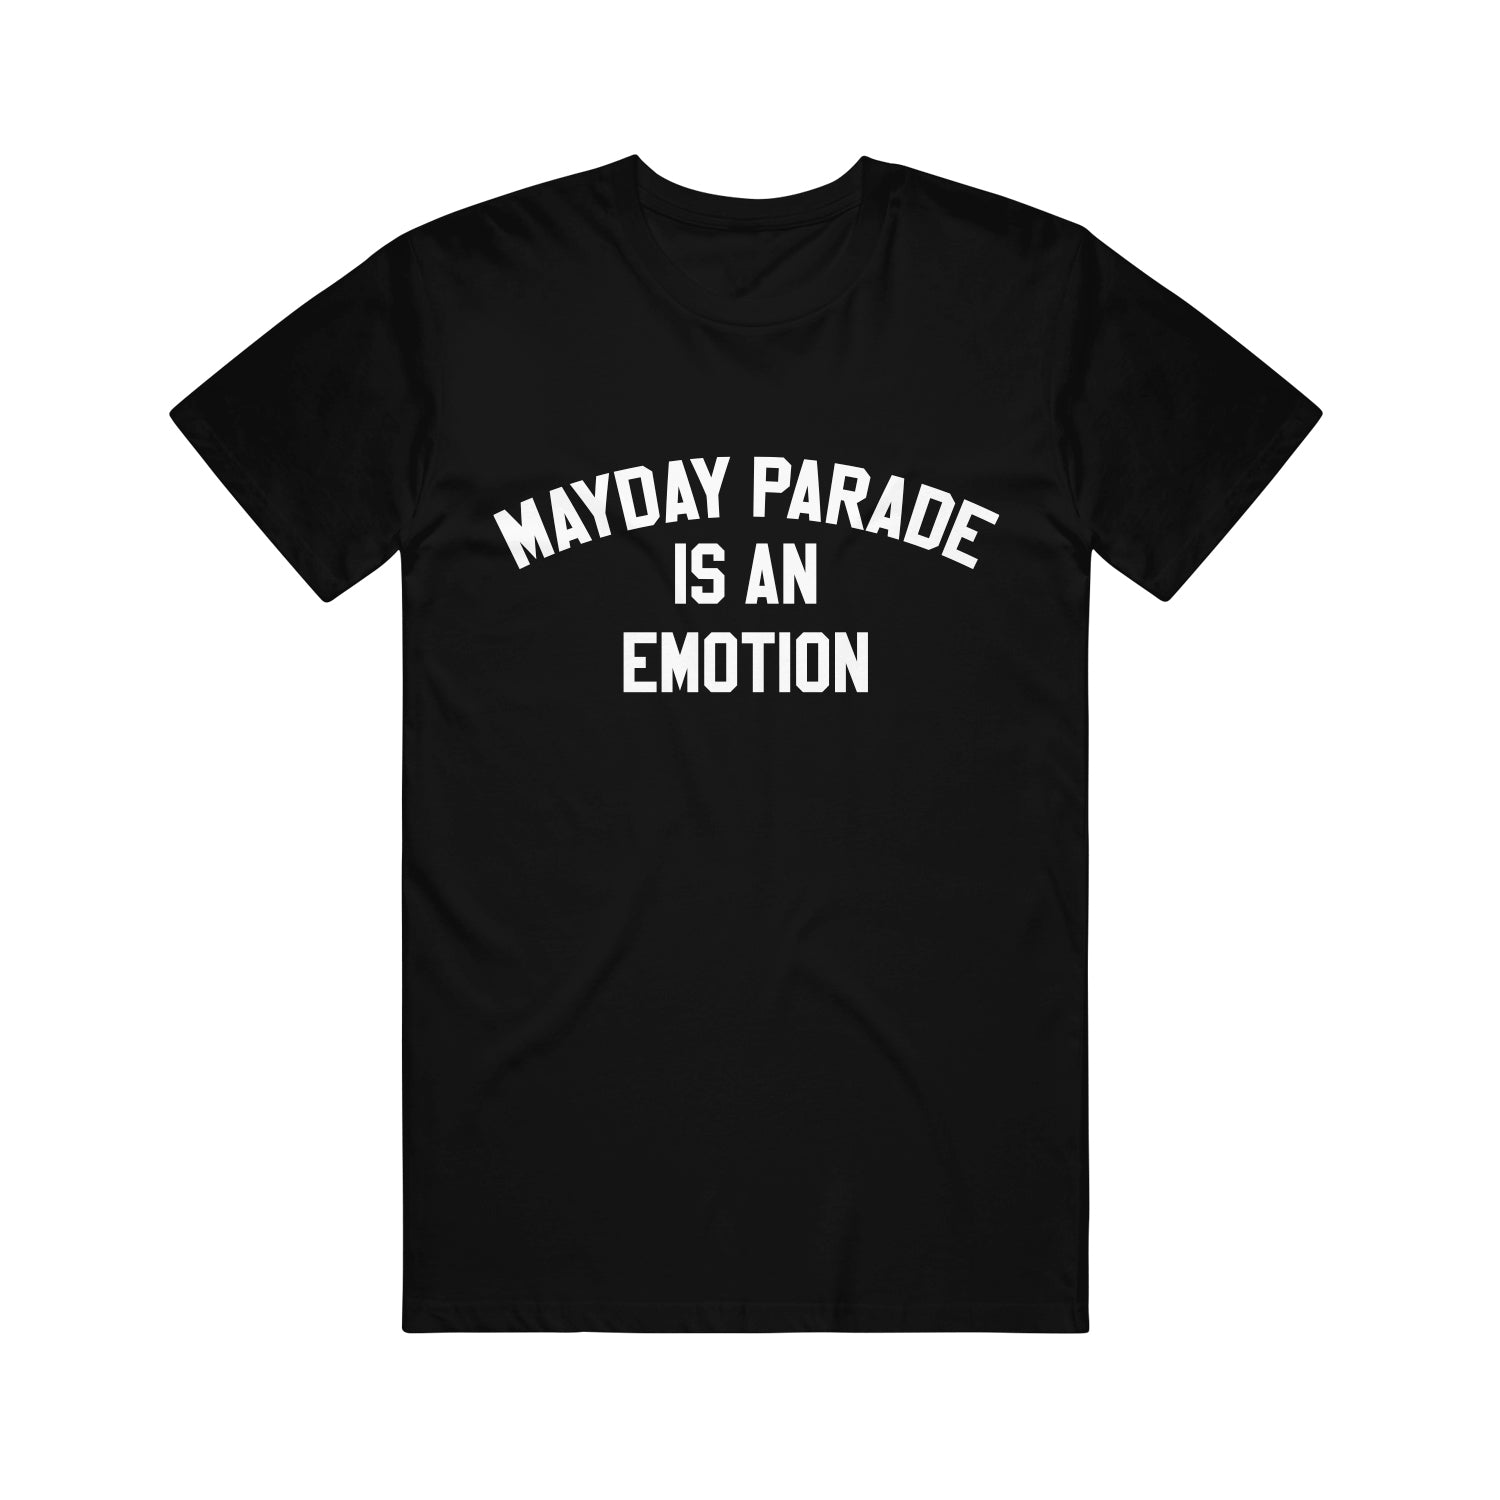 Is An Emotion Black Tee